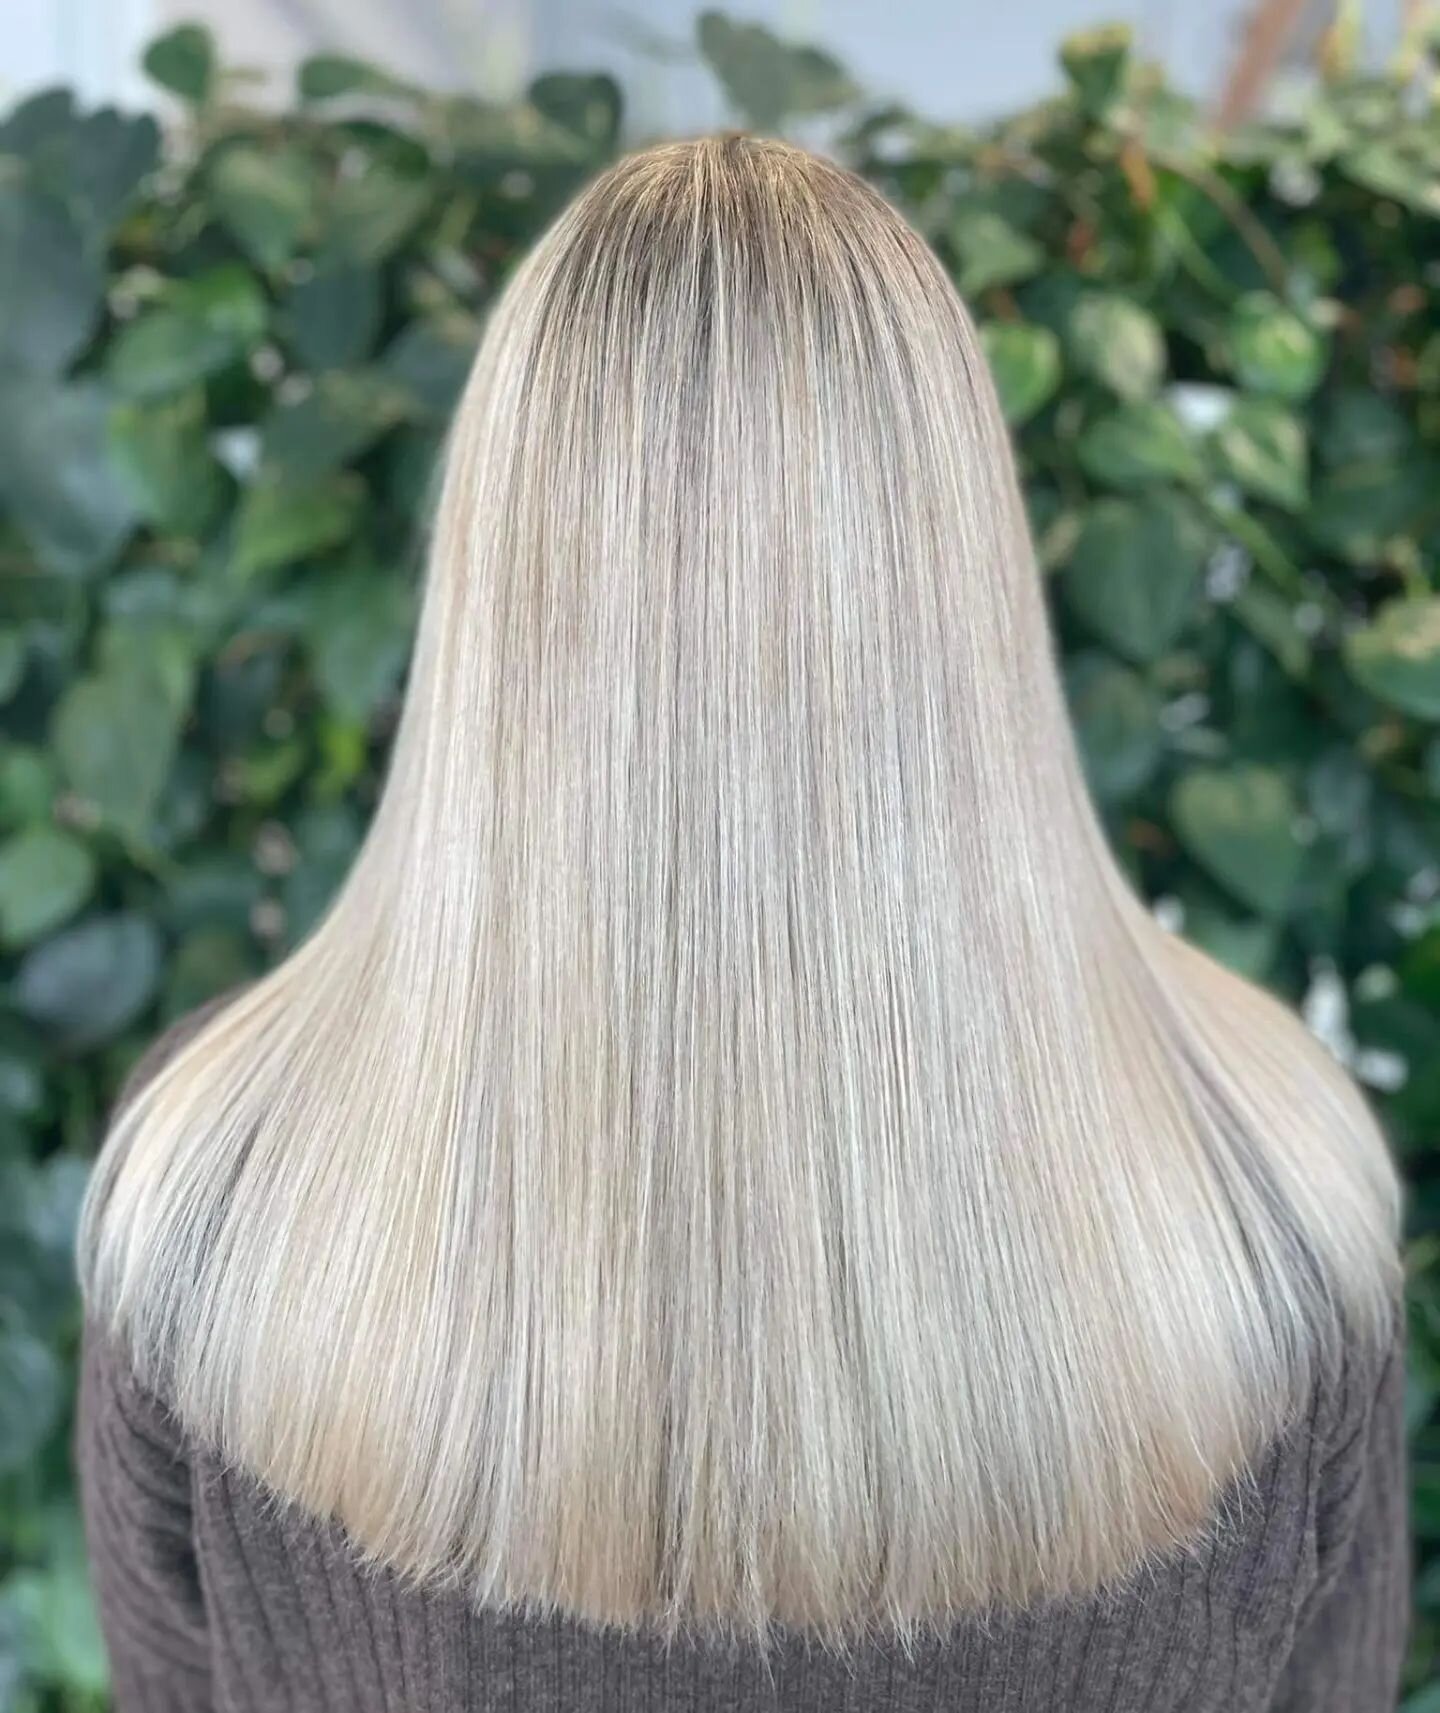 B R I G H T and blonde again for Bella 💫💫

Thanks for coming down from Auckland to see us! 😍

Hair by Crystal.

#henderson #hairathenderson #beforeandafter #blonde #blondehair #blondegoals #lakmeblonde #napiersalon #napierstylist #napierhairdresse